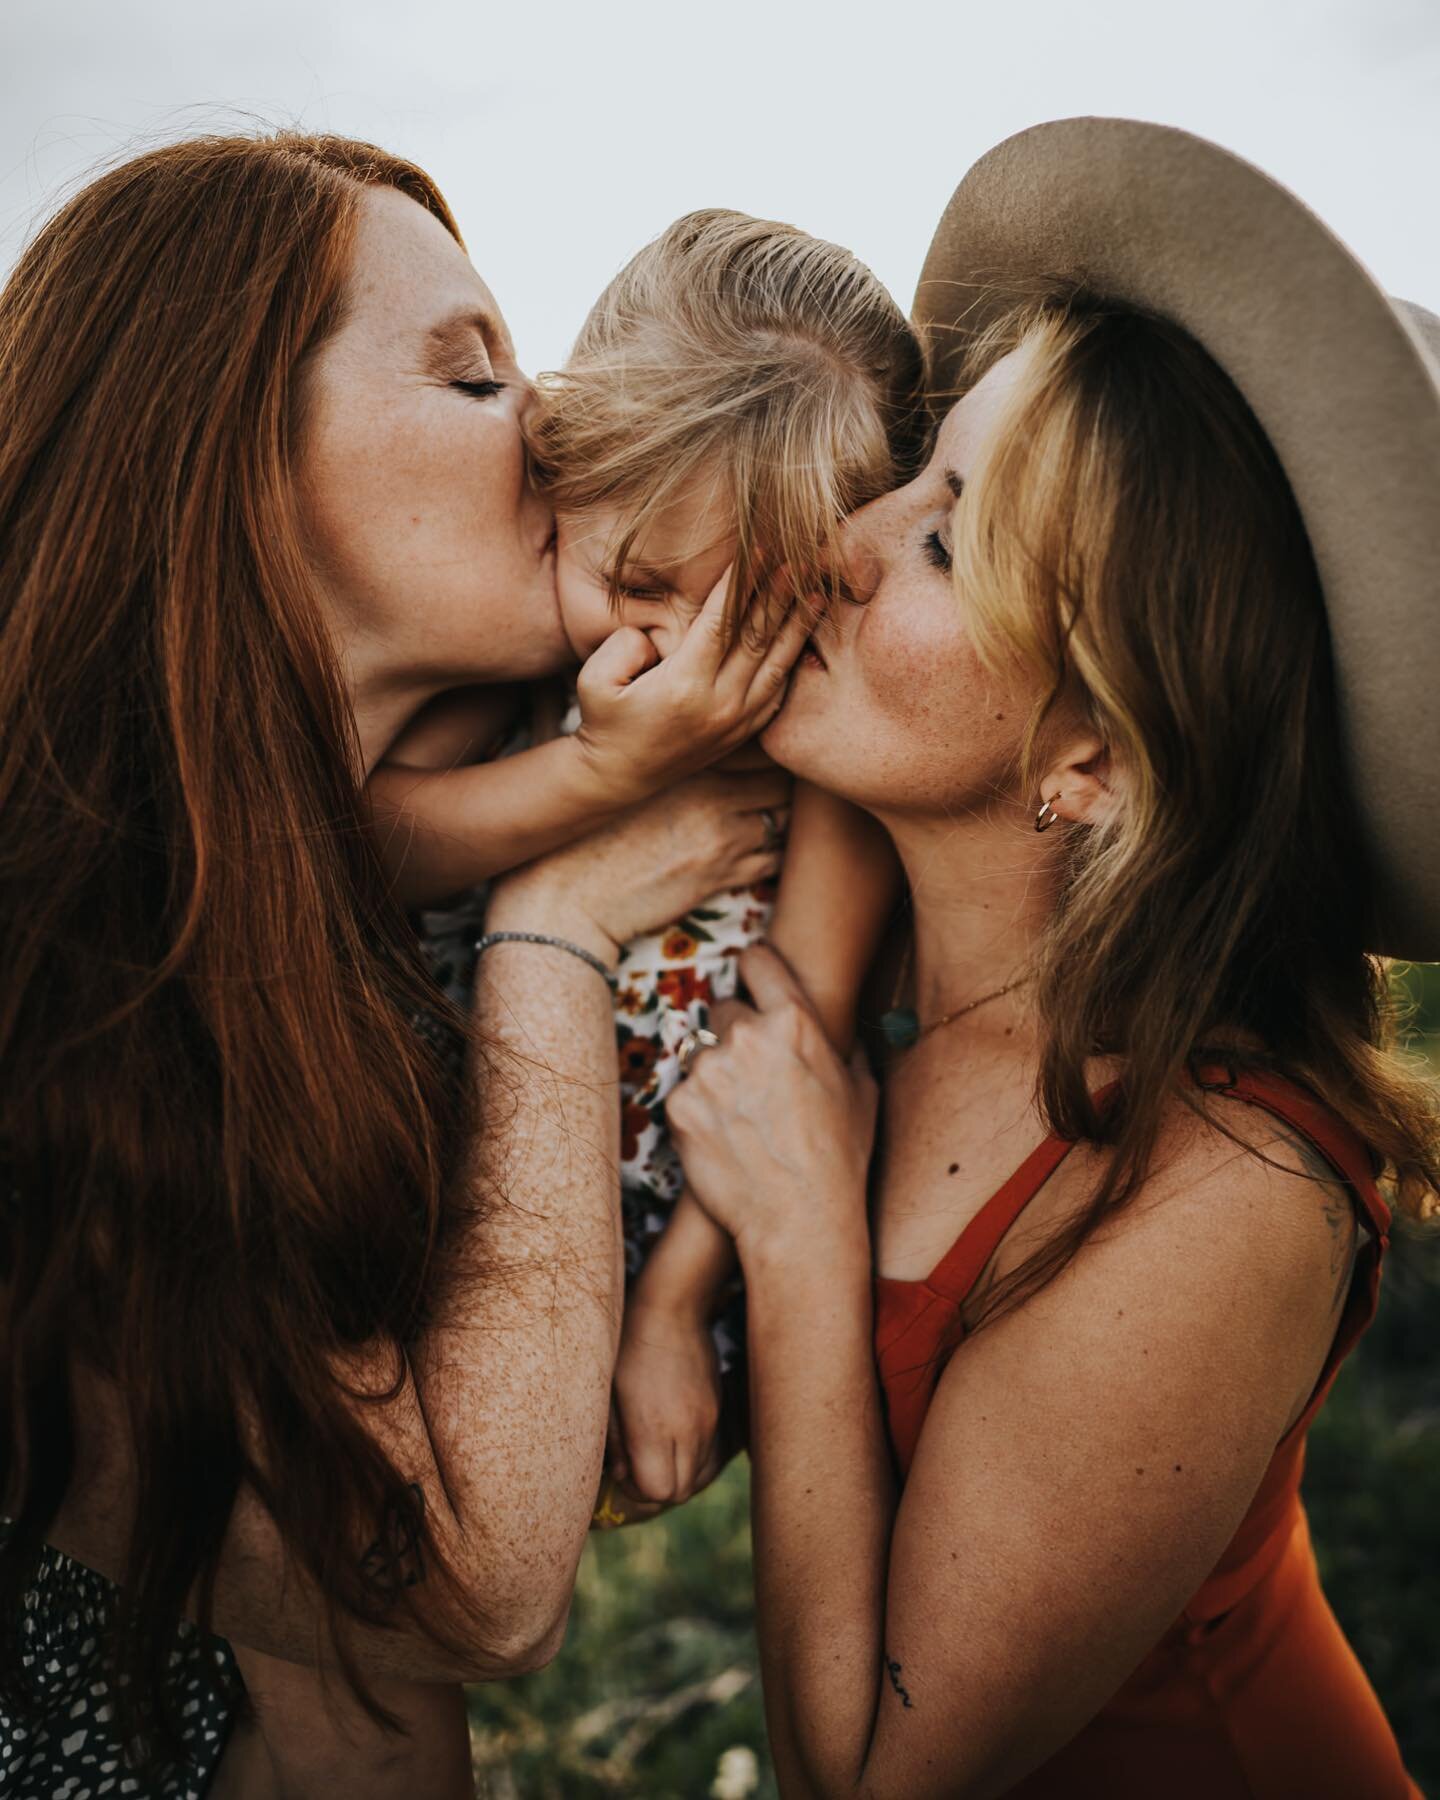 These sweet friends and babe. Smoosh kisses are always a win. Always.

#coloradofamilyphotographer #coloradospringsfamilyphotographer